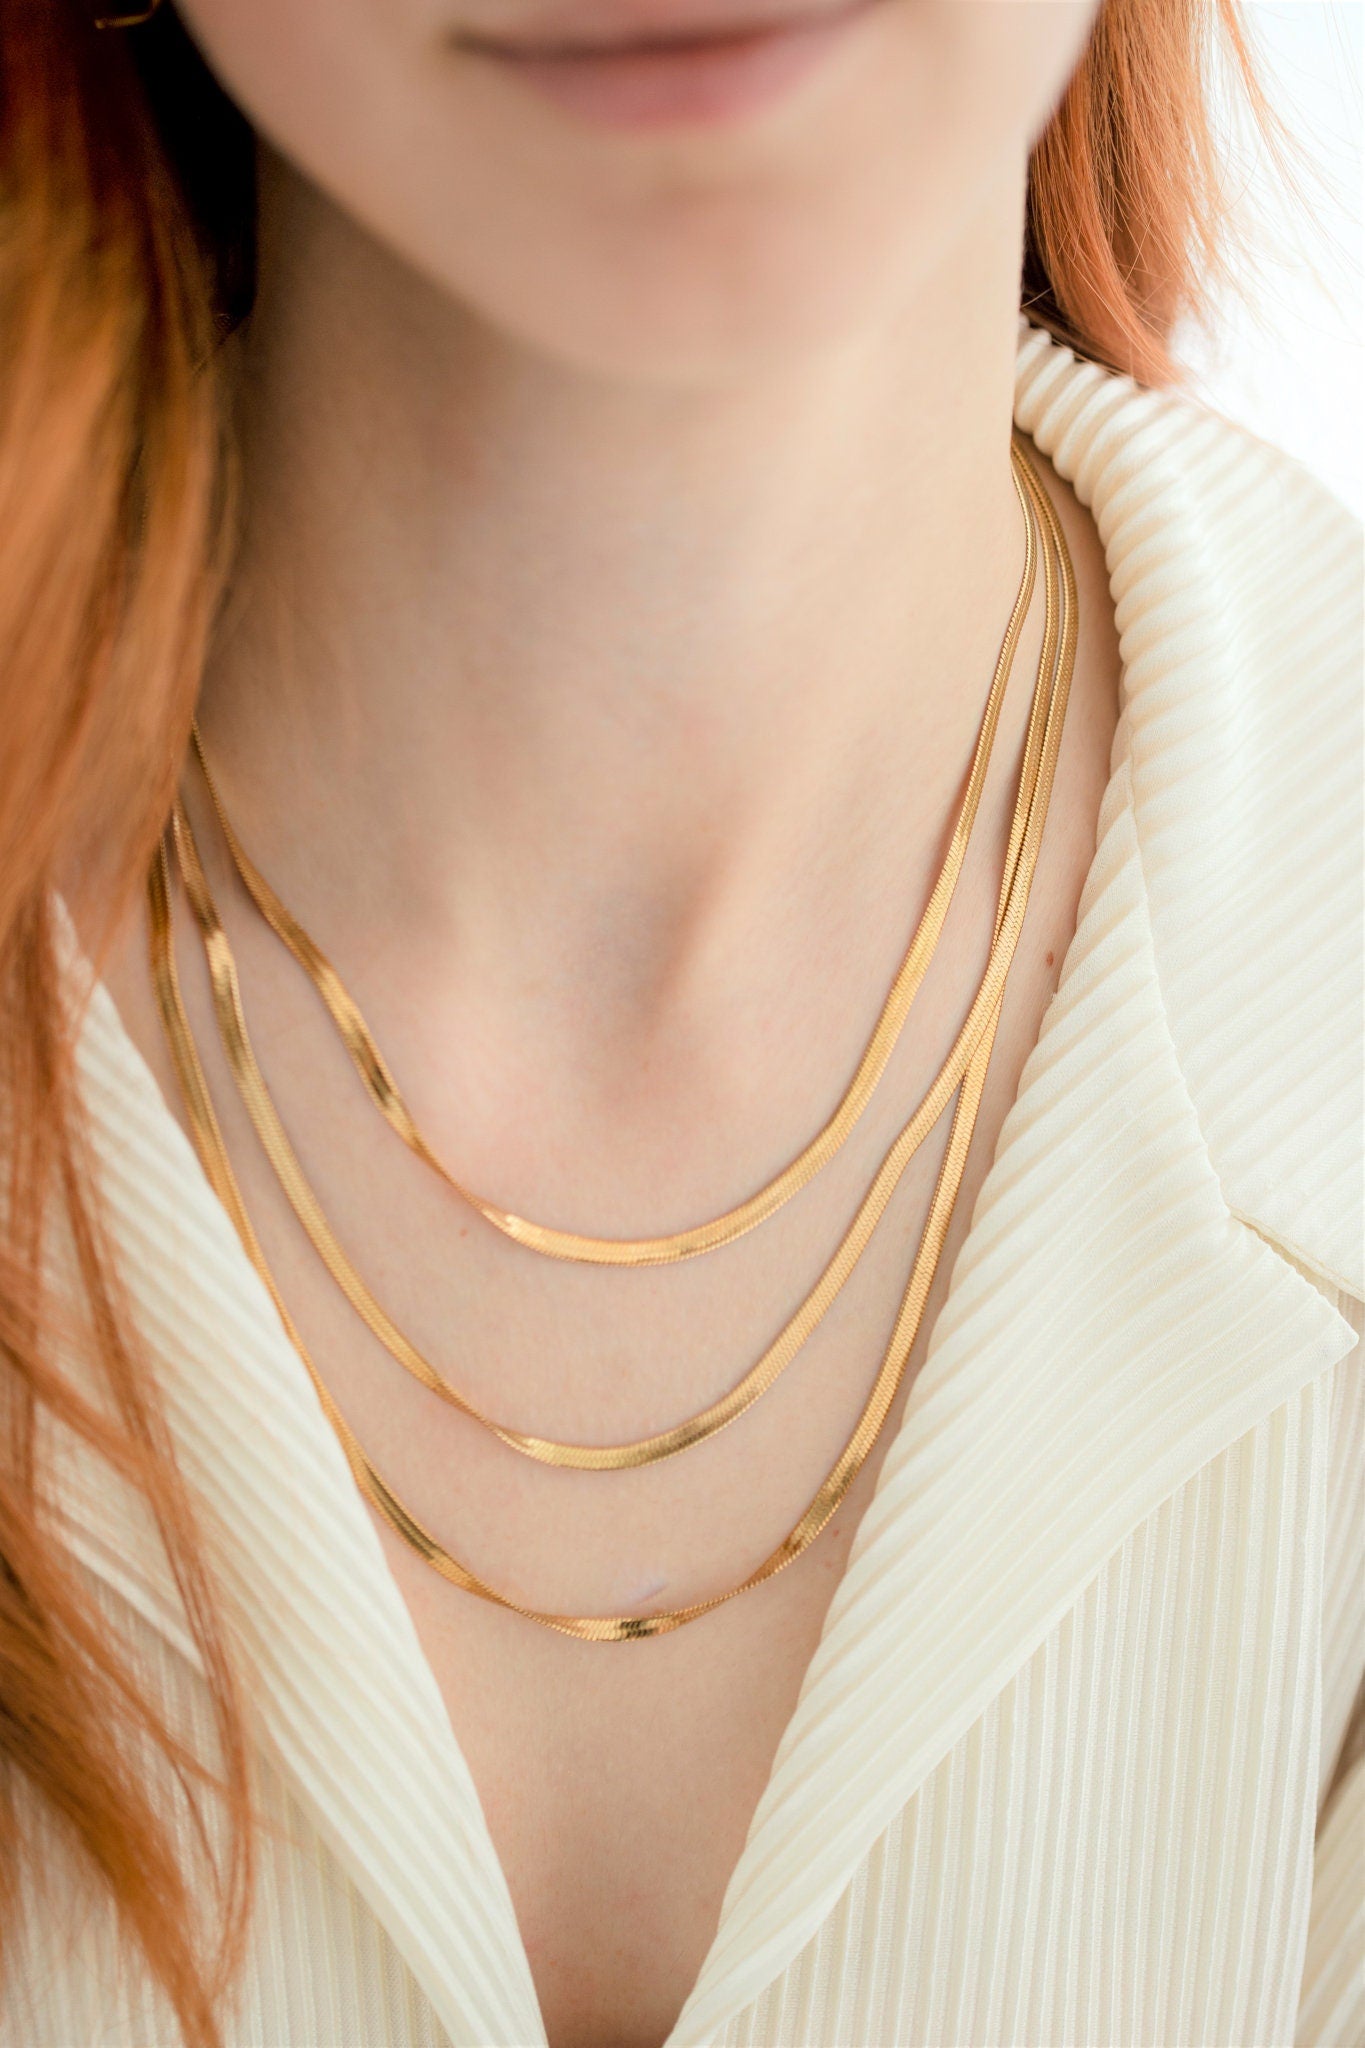 Layered Herringbone Necklace, 18K Gold, Gift For Mom, Multiple Herringbone Necklace, Waterproof Layering Necklace, Snake Chain Necklace